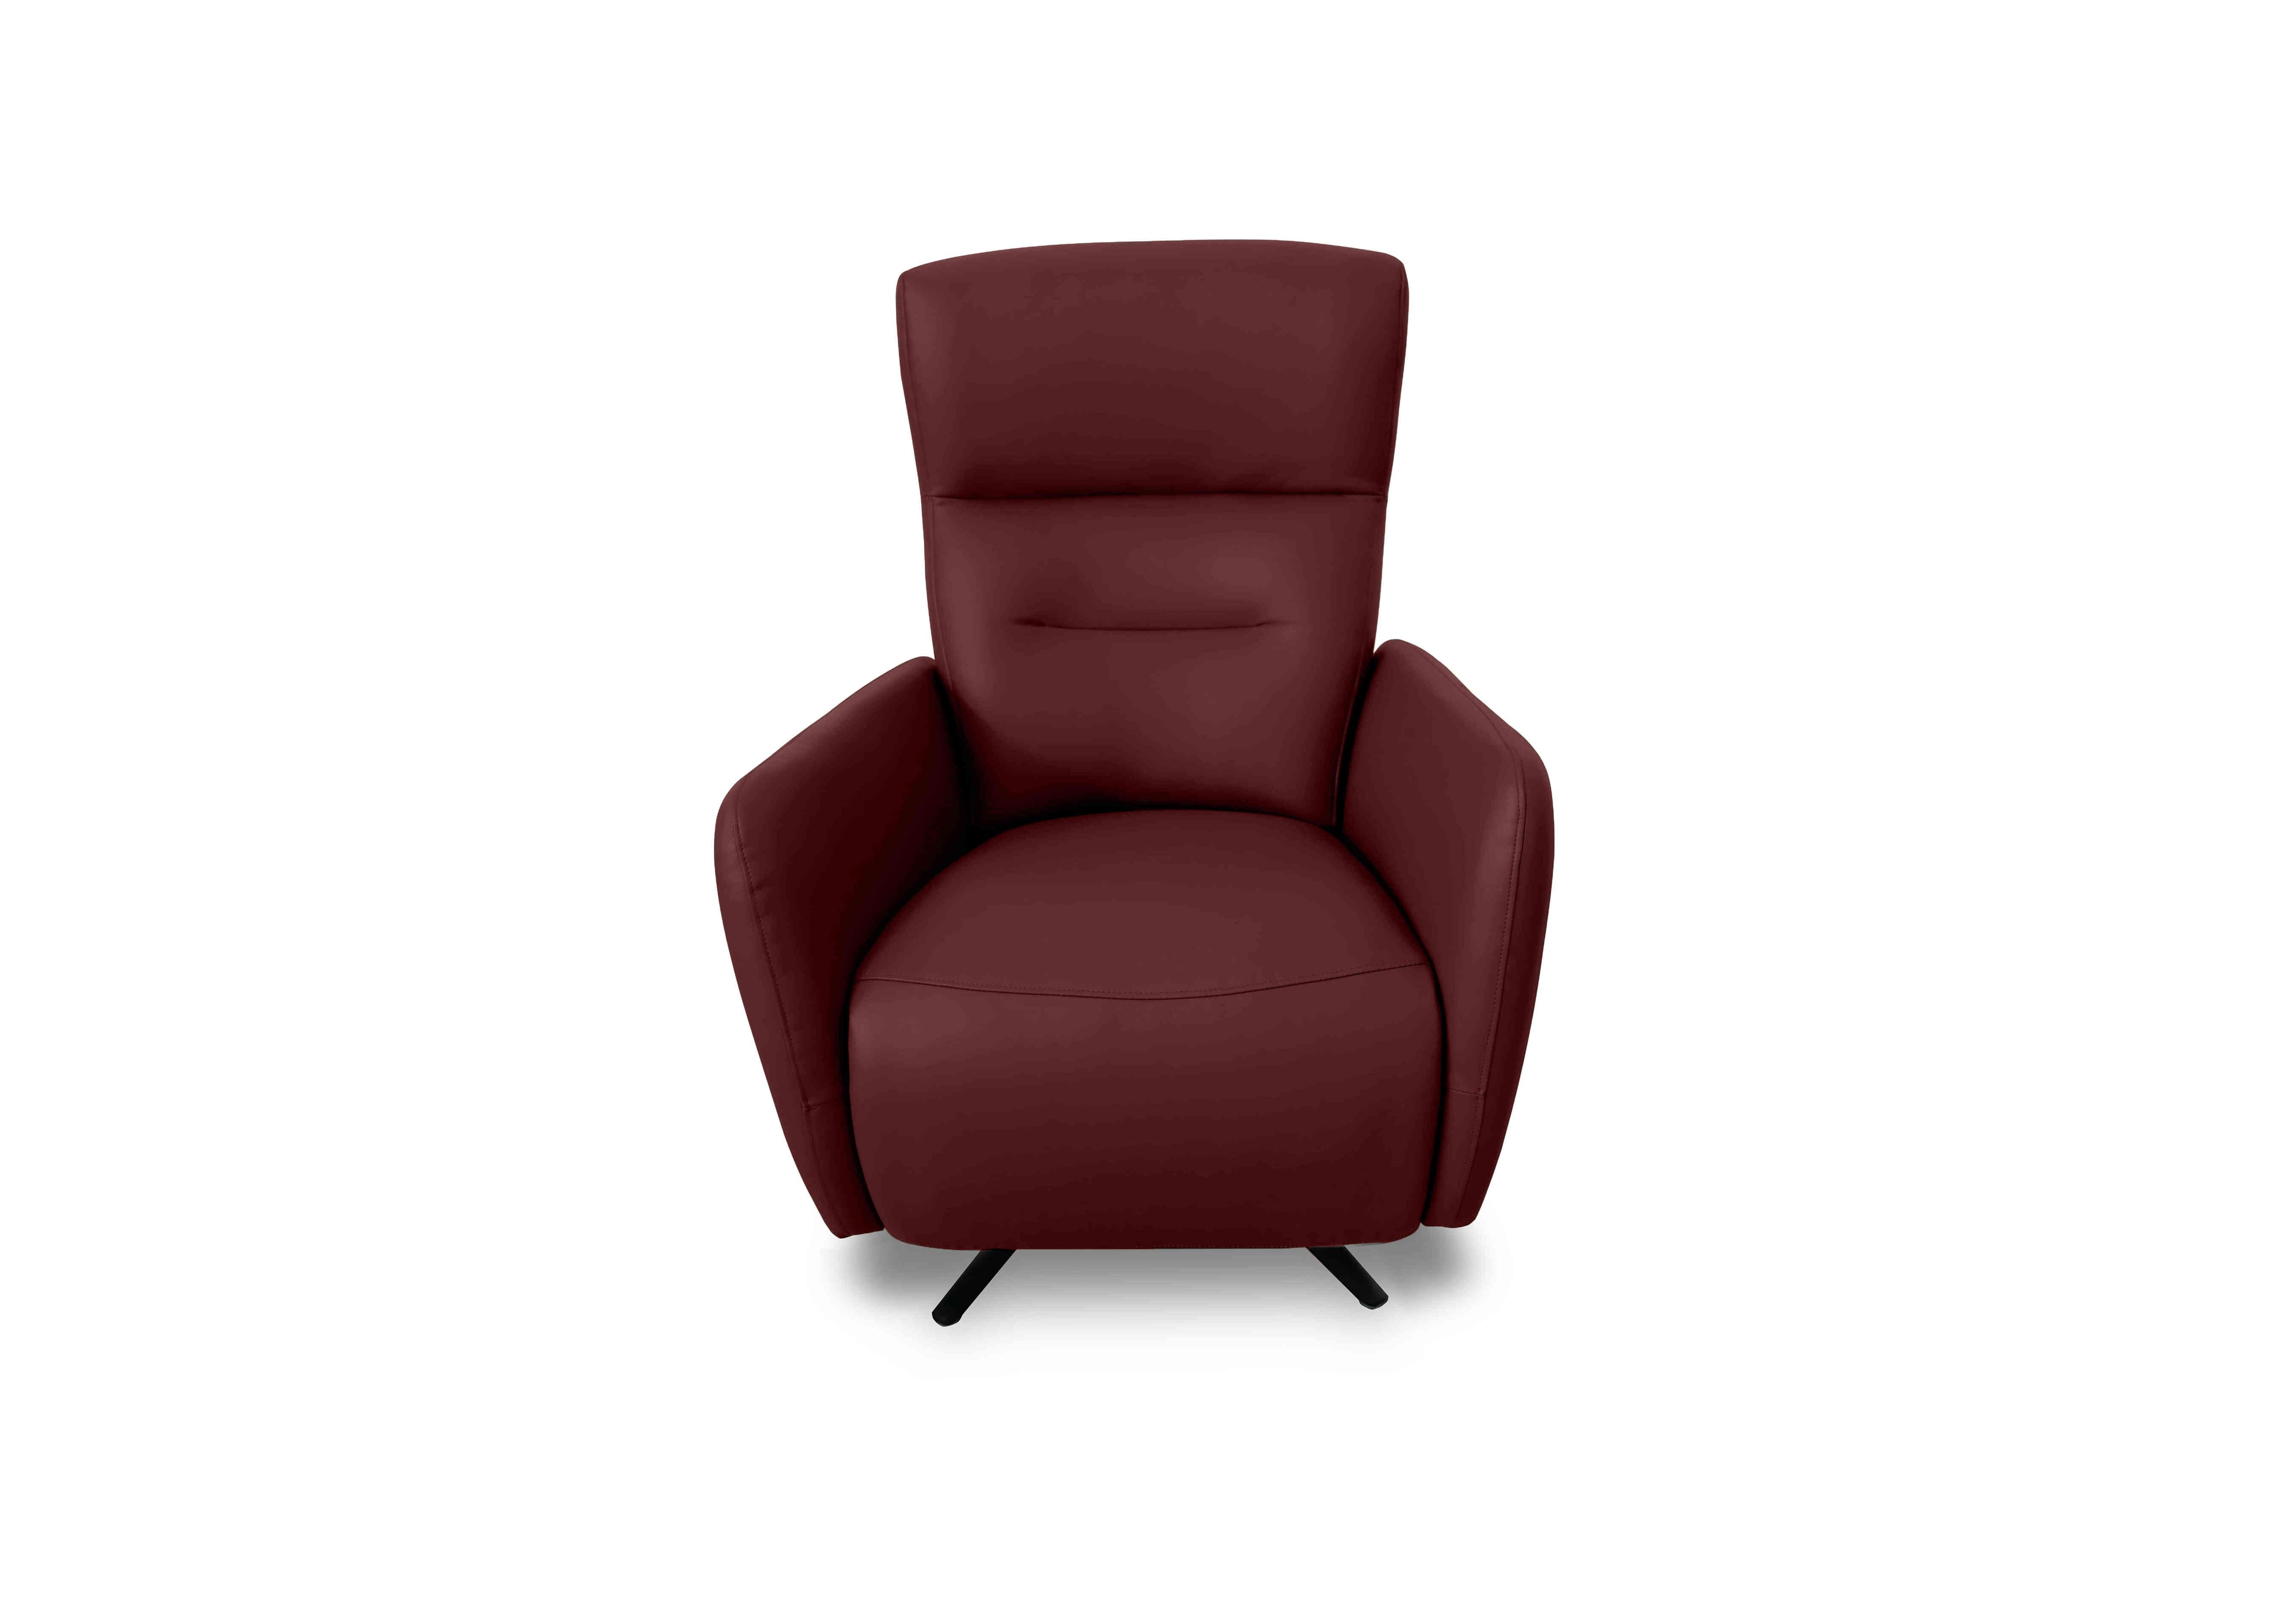 Designer Chair Collection Le Mans Leather Dual Power Recliner Swivel Chair in Hw-035c Deep Red on Furniture Village